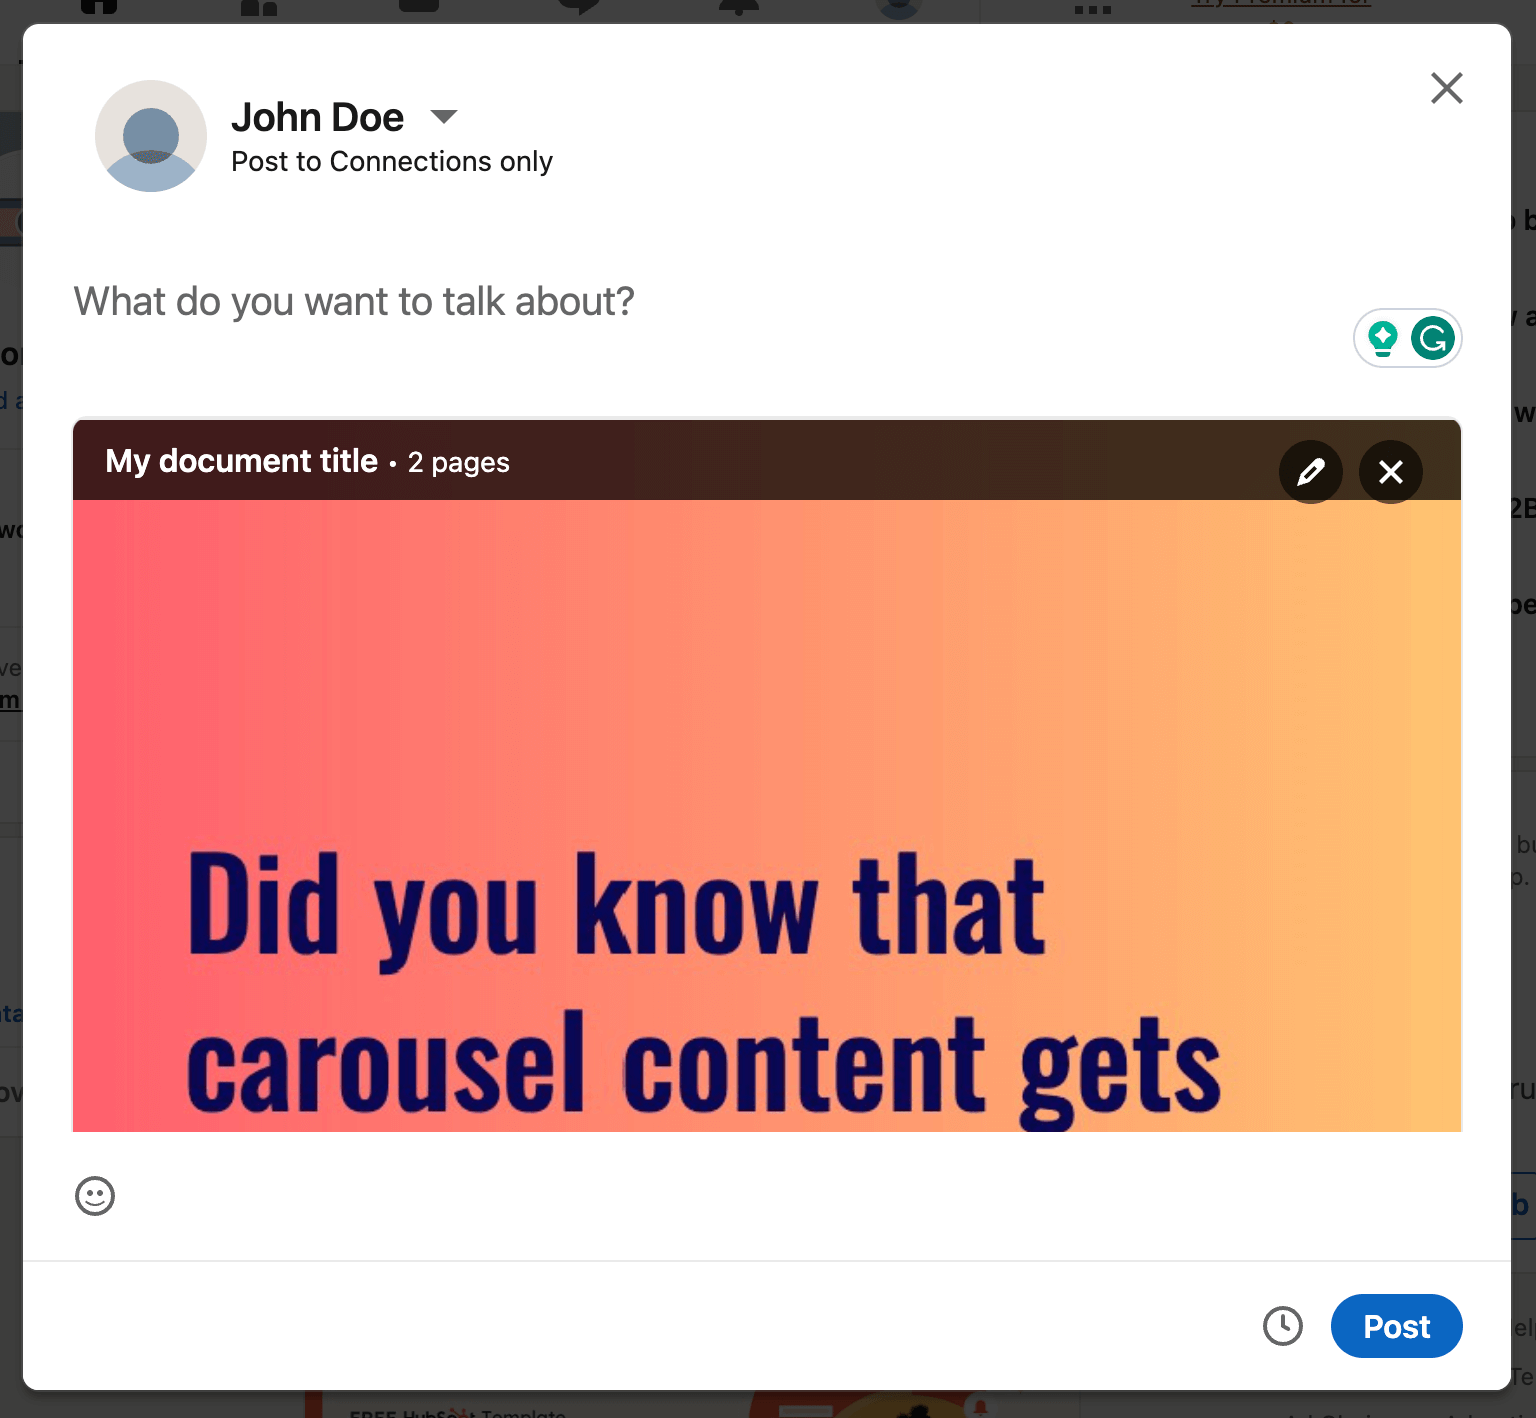 How to post a LinkedIn Carousel: Step 6 - Post